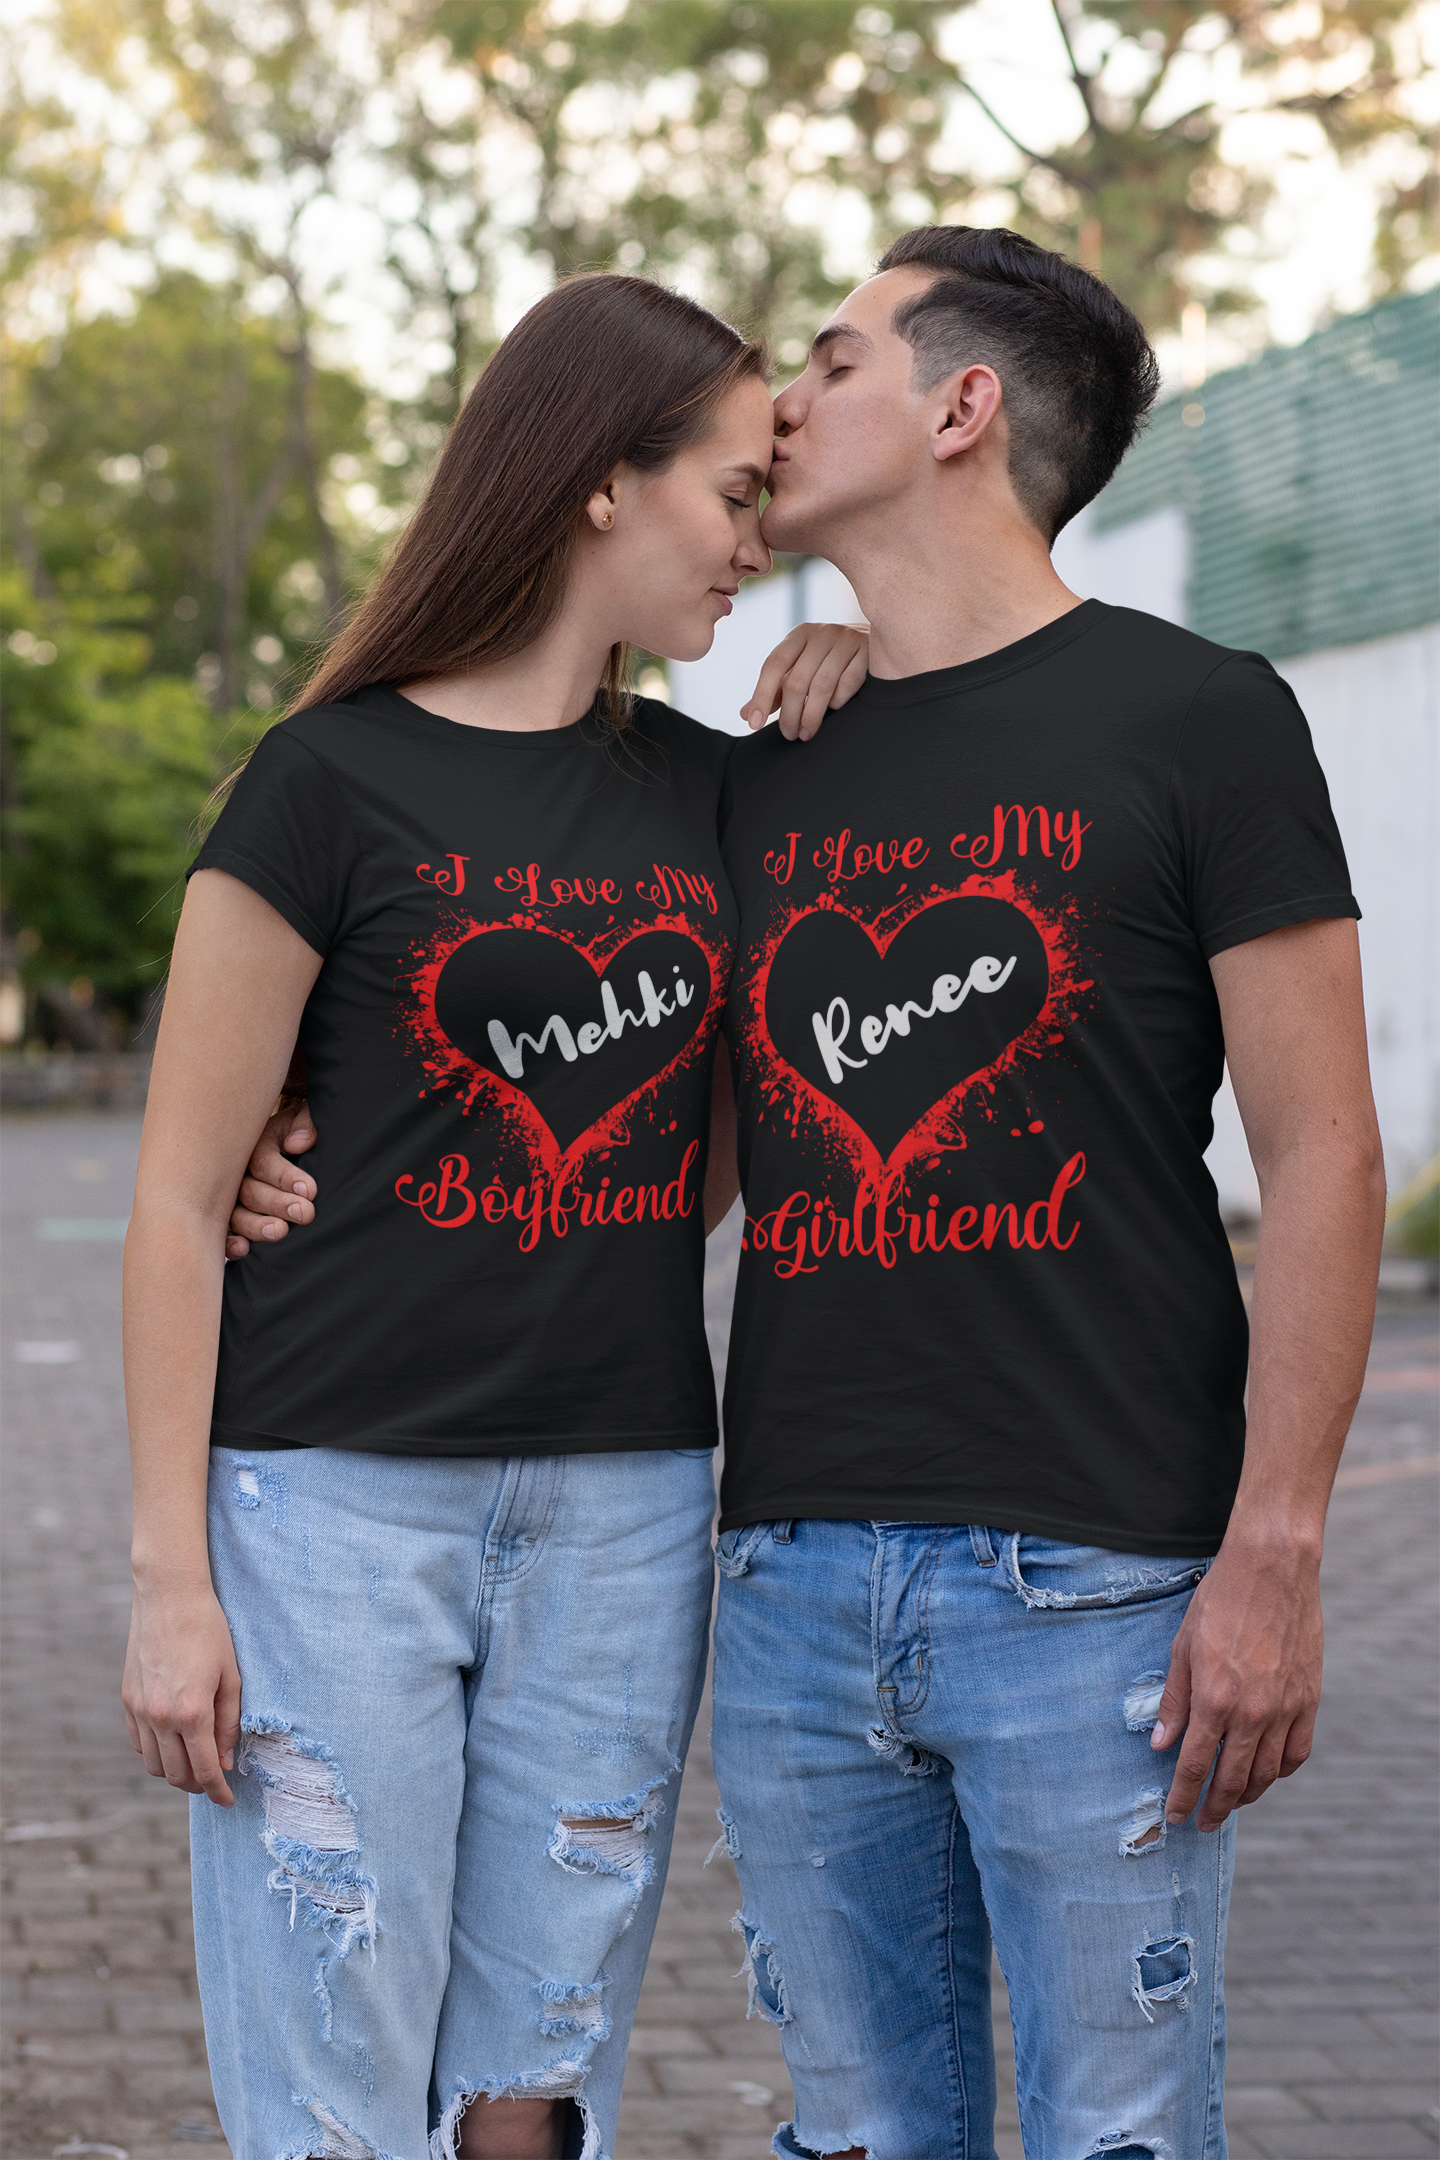 I love my girlfriend t shirt matching shirts for couples